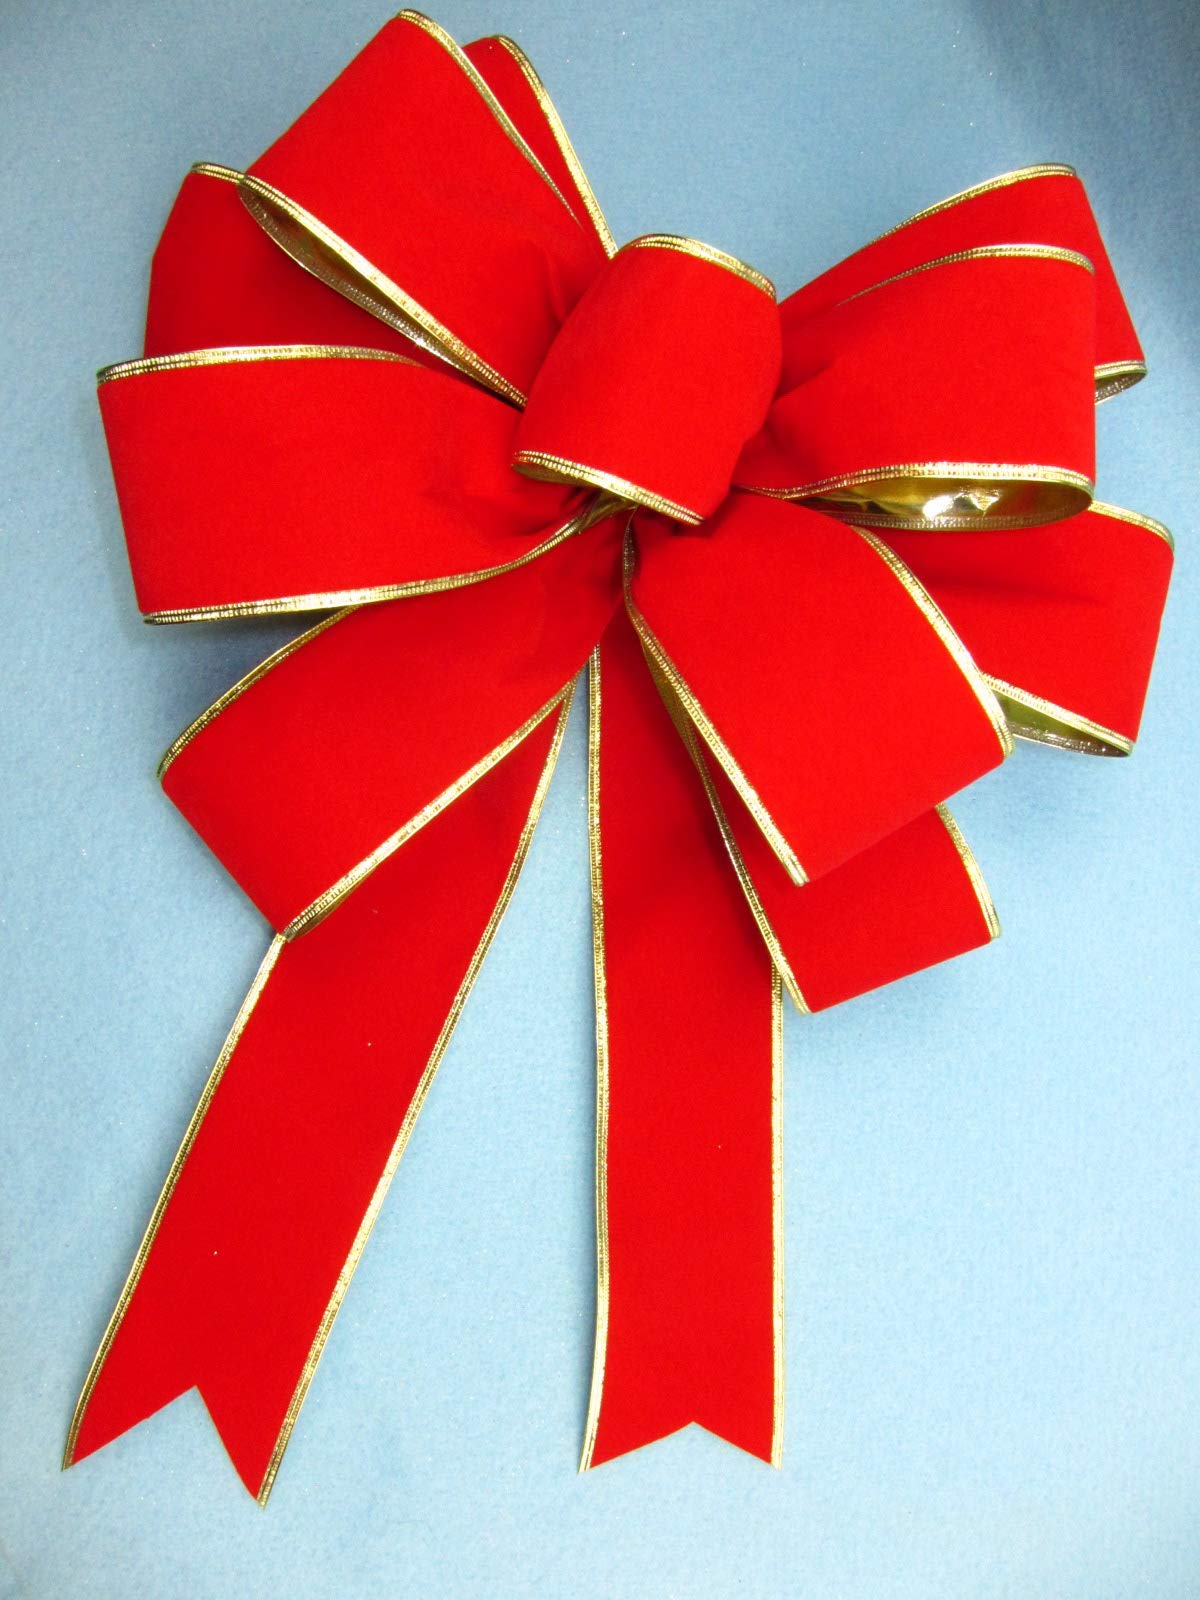 Pro Bow - The Hand Bow Maker (Large), Patented - Make Custom 3 Ribbon Bows for Holiday Wreaths and More